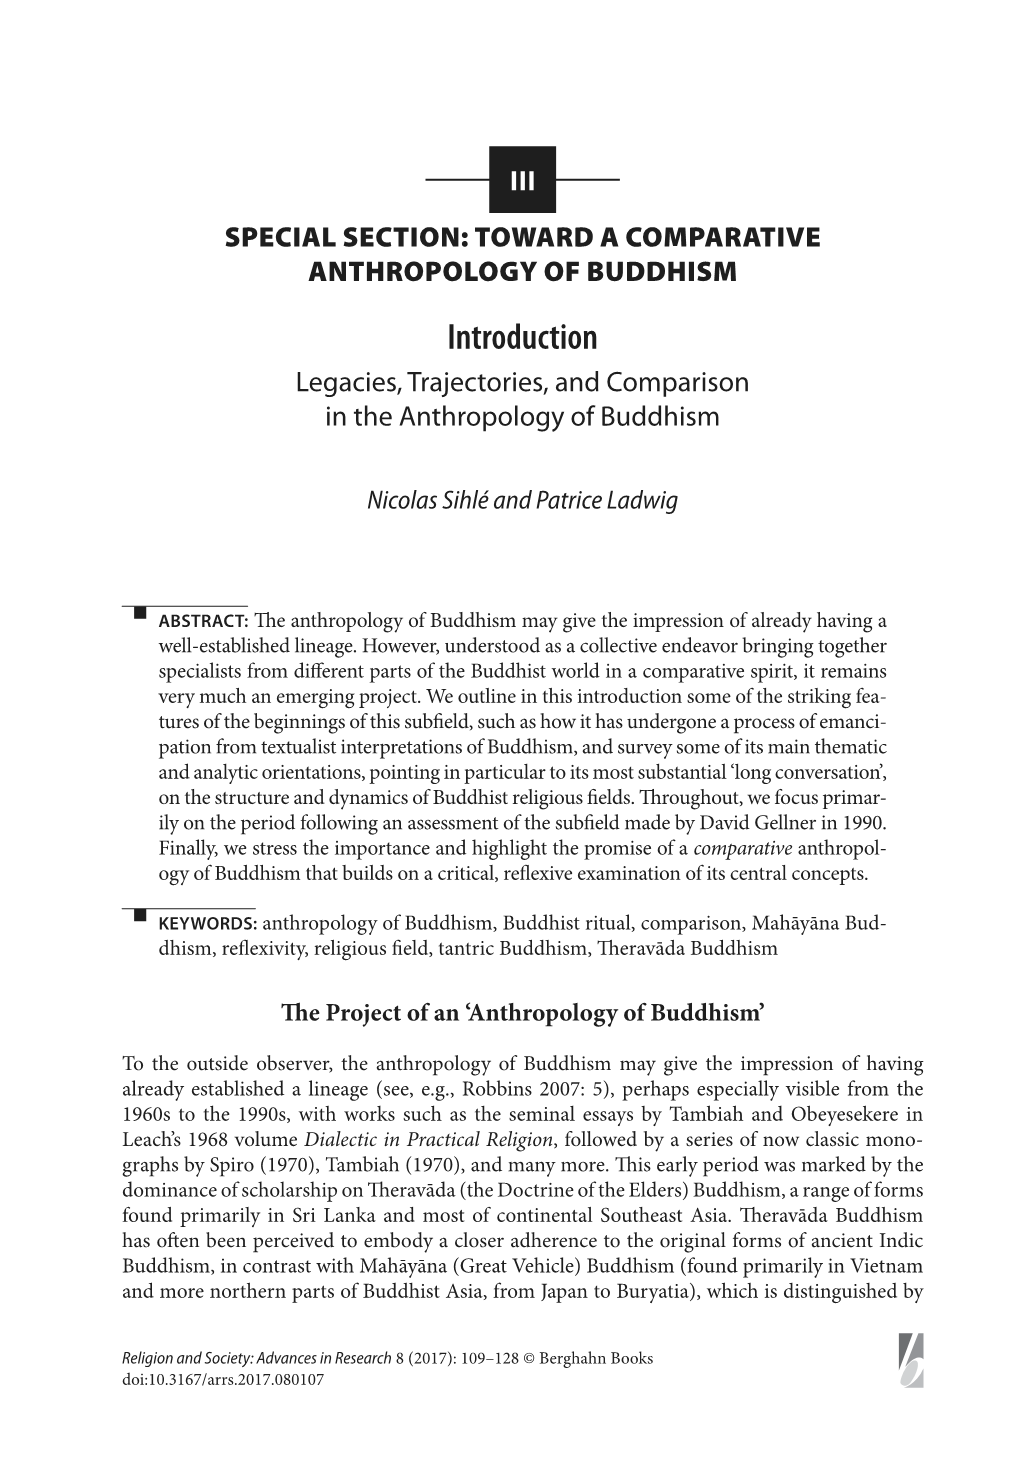 Introduction Legacies, Trajectories, and Comparison in the Anthropology of Buddhism